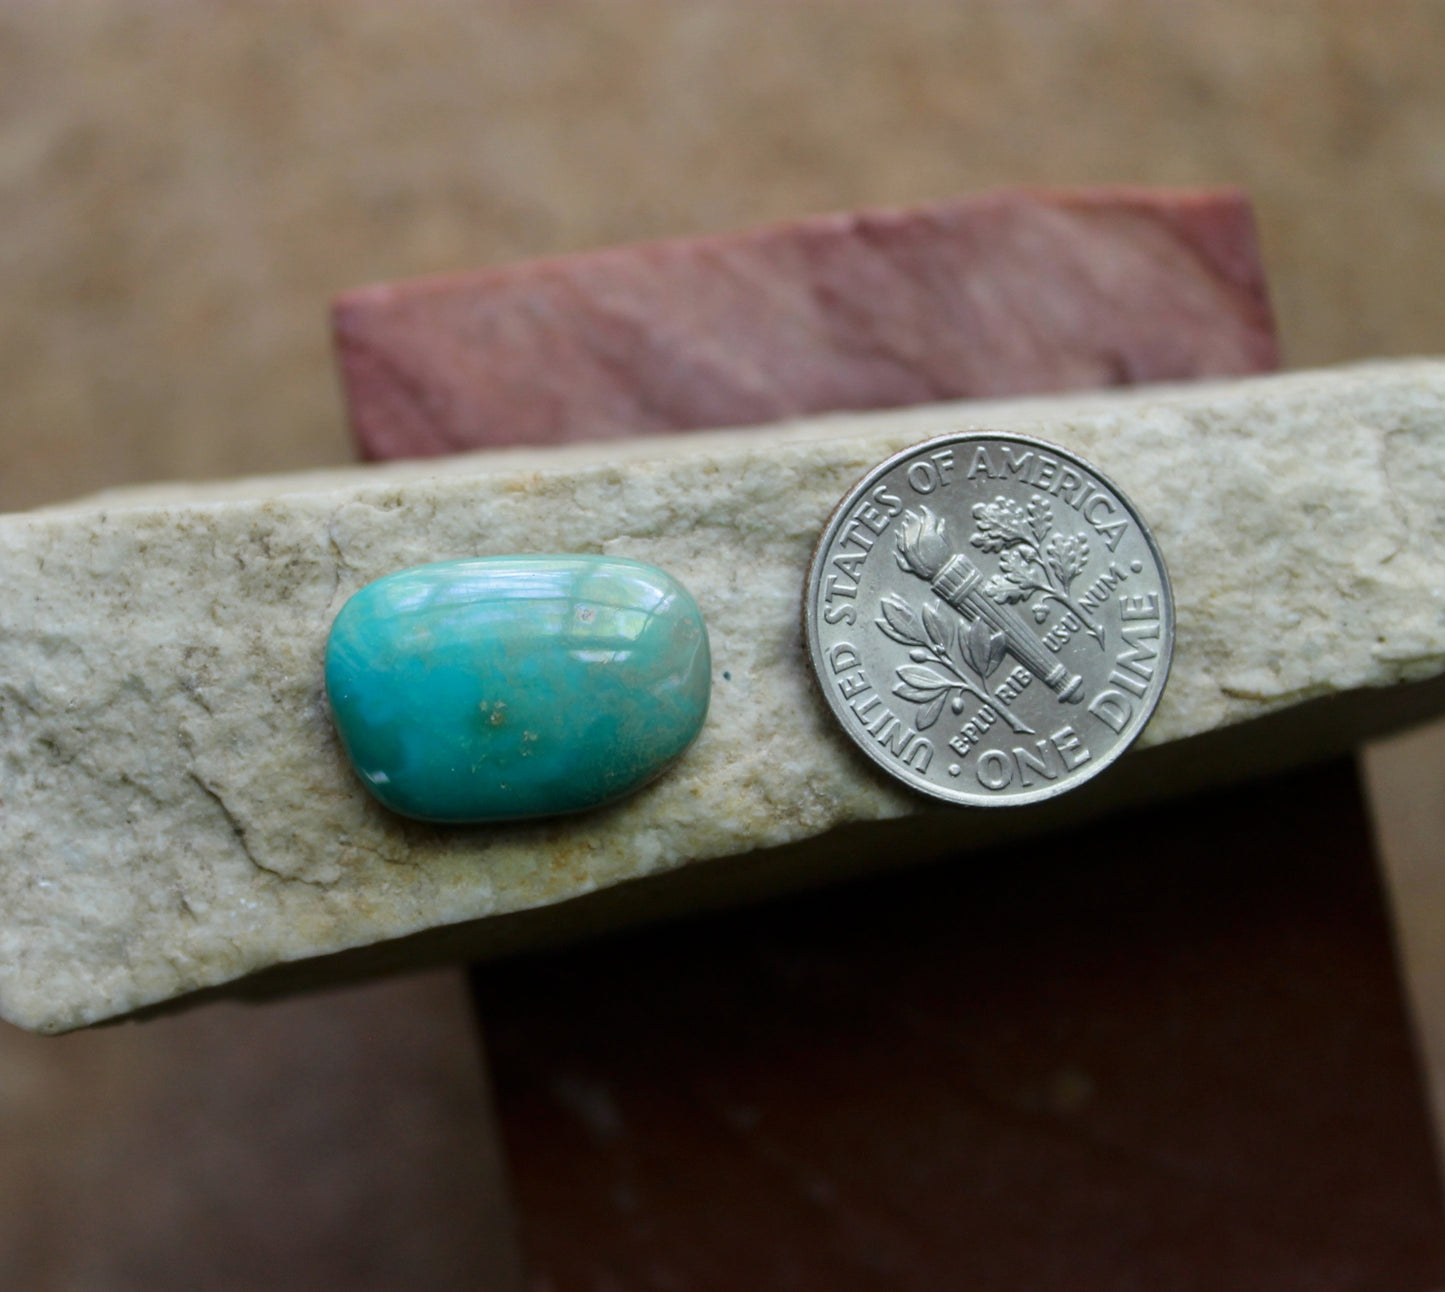 7 carat green turquoise cabochon from Stone Mountain Mine